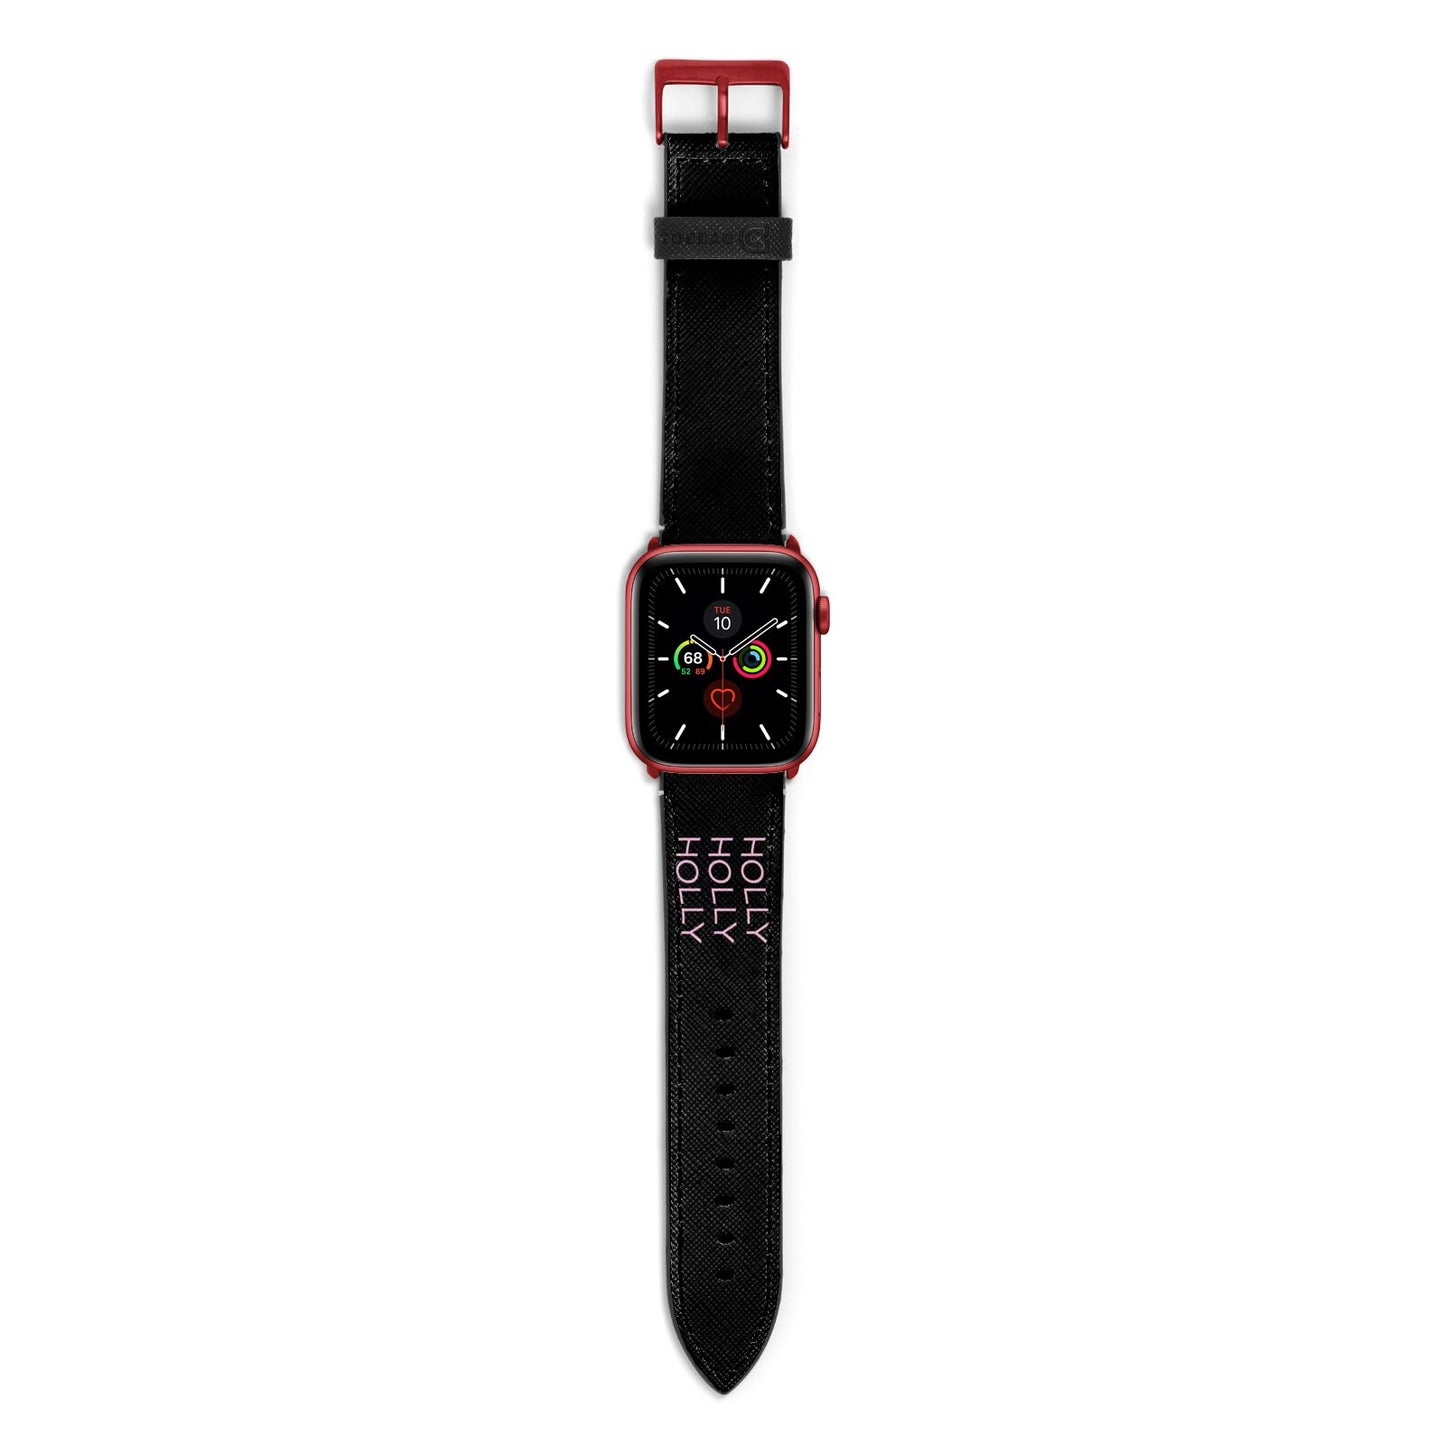 Wavy Name Apple Watch Strap with Red Hardware